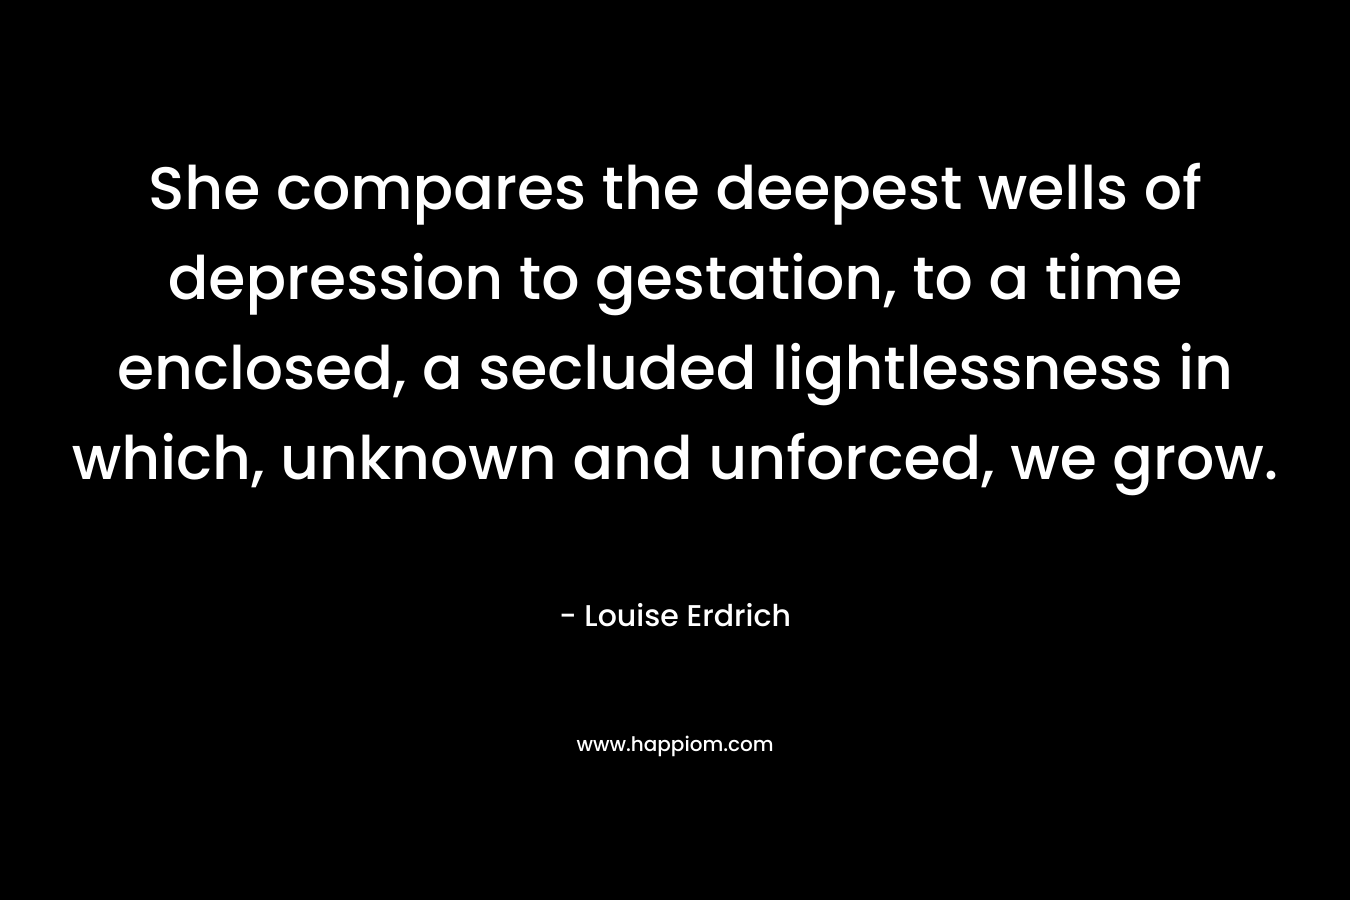 She compares the deepest wells of depression to gestation, to a time enclosed, a secluded lightlessness in which, unknown and unforced, we grow.